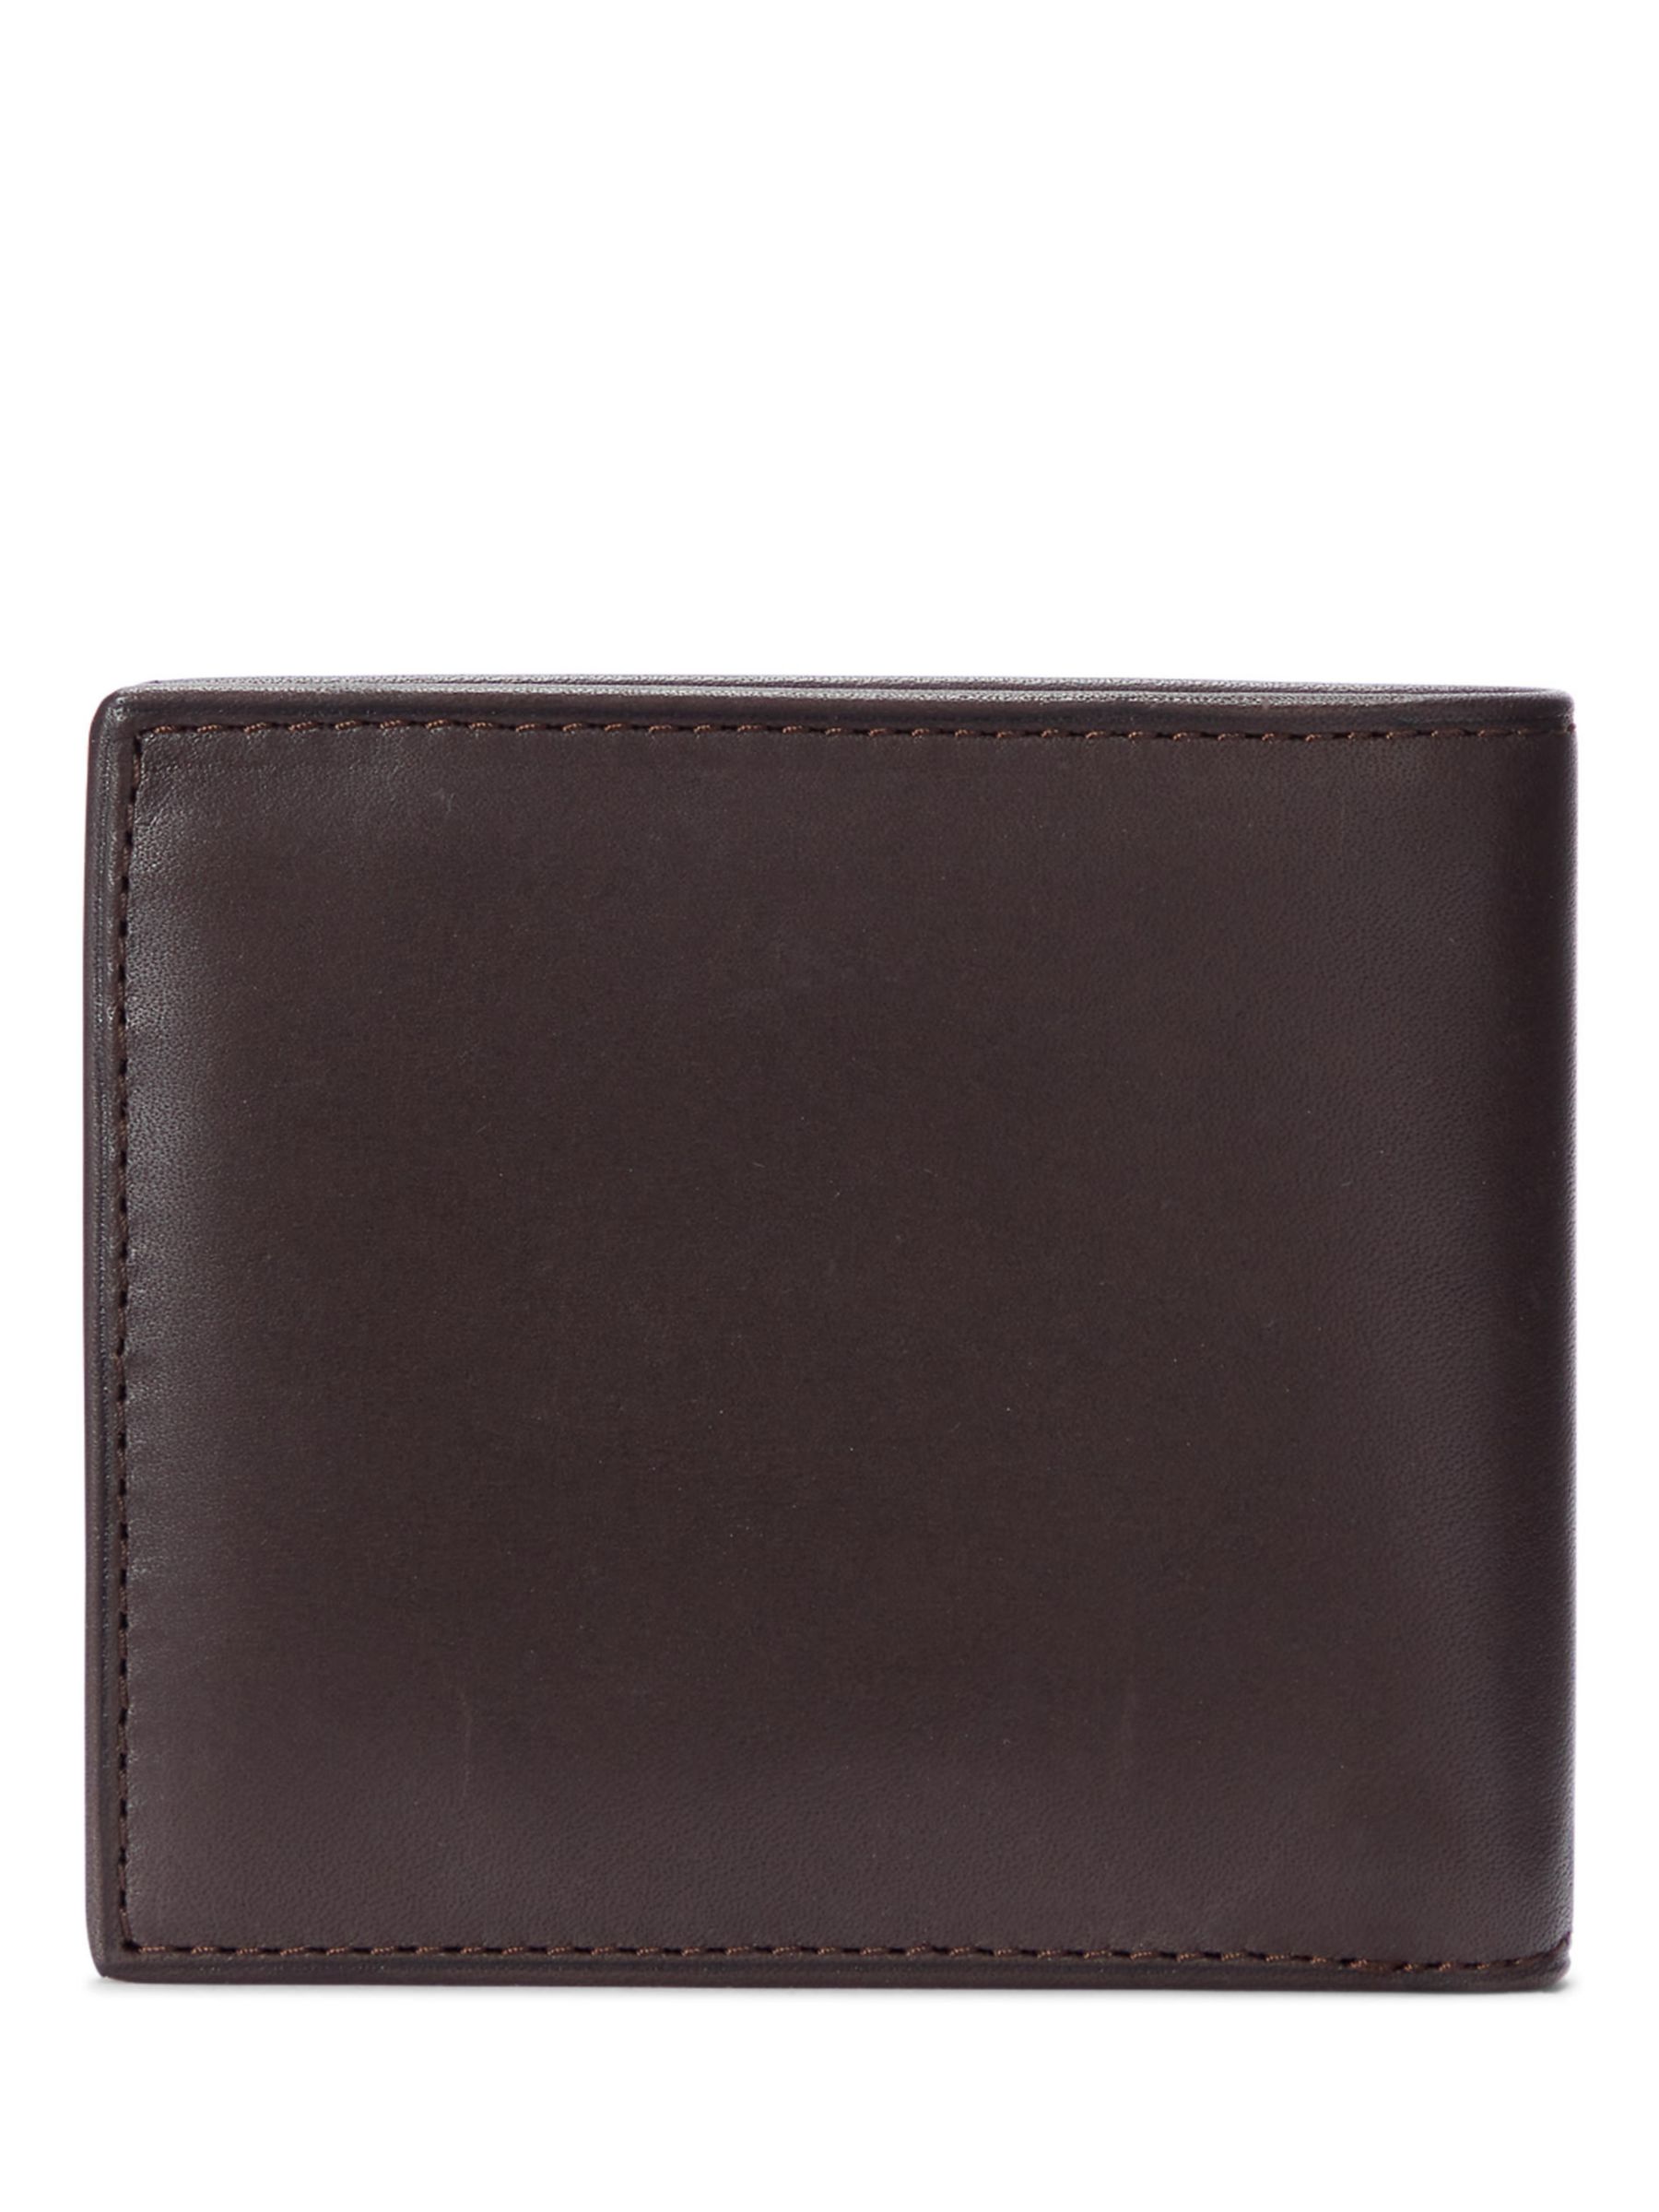 Polo Ralph Lauren Embroidered Leather Wallet, Brown at John Lewis & Partners